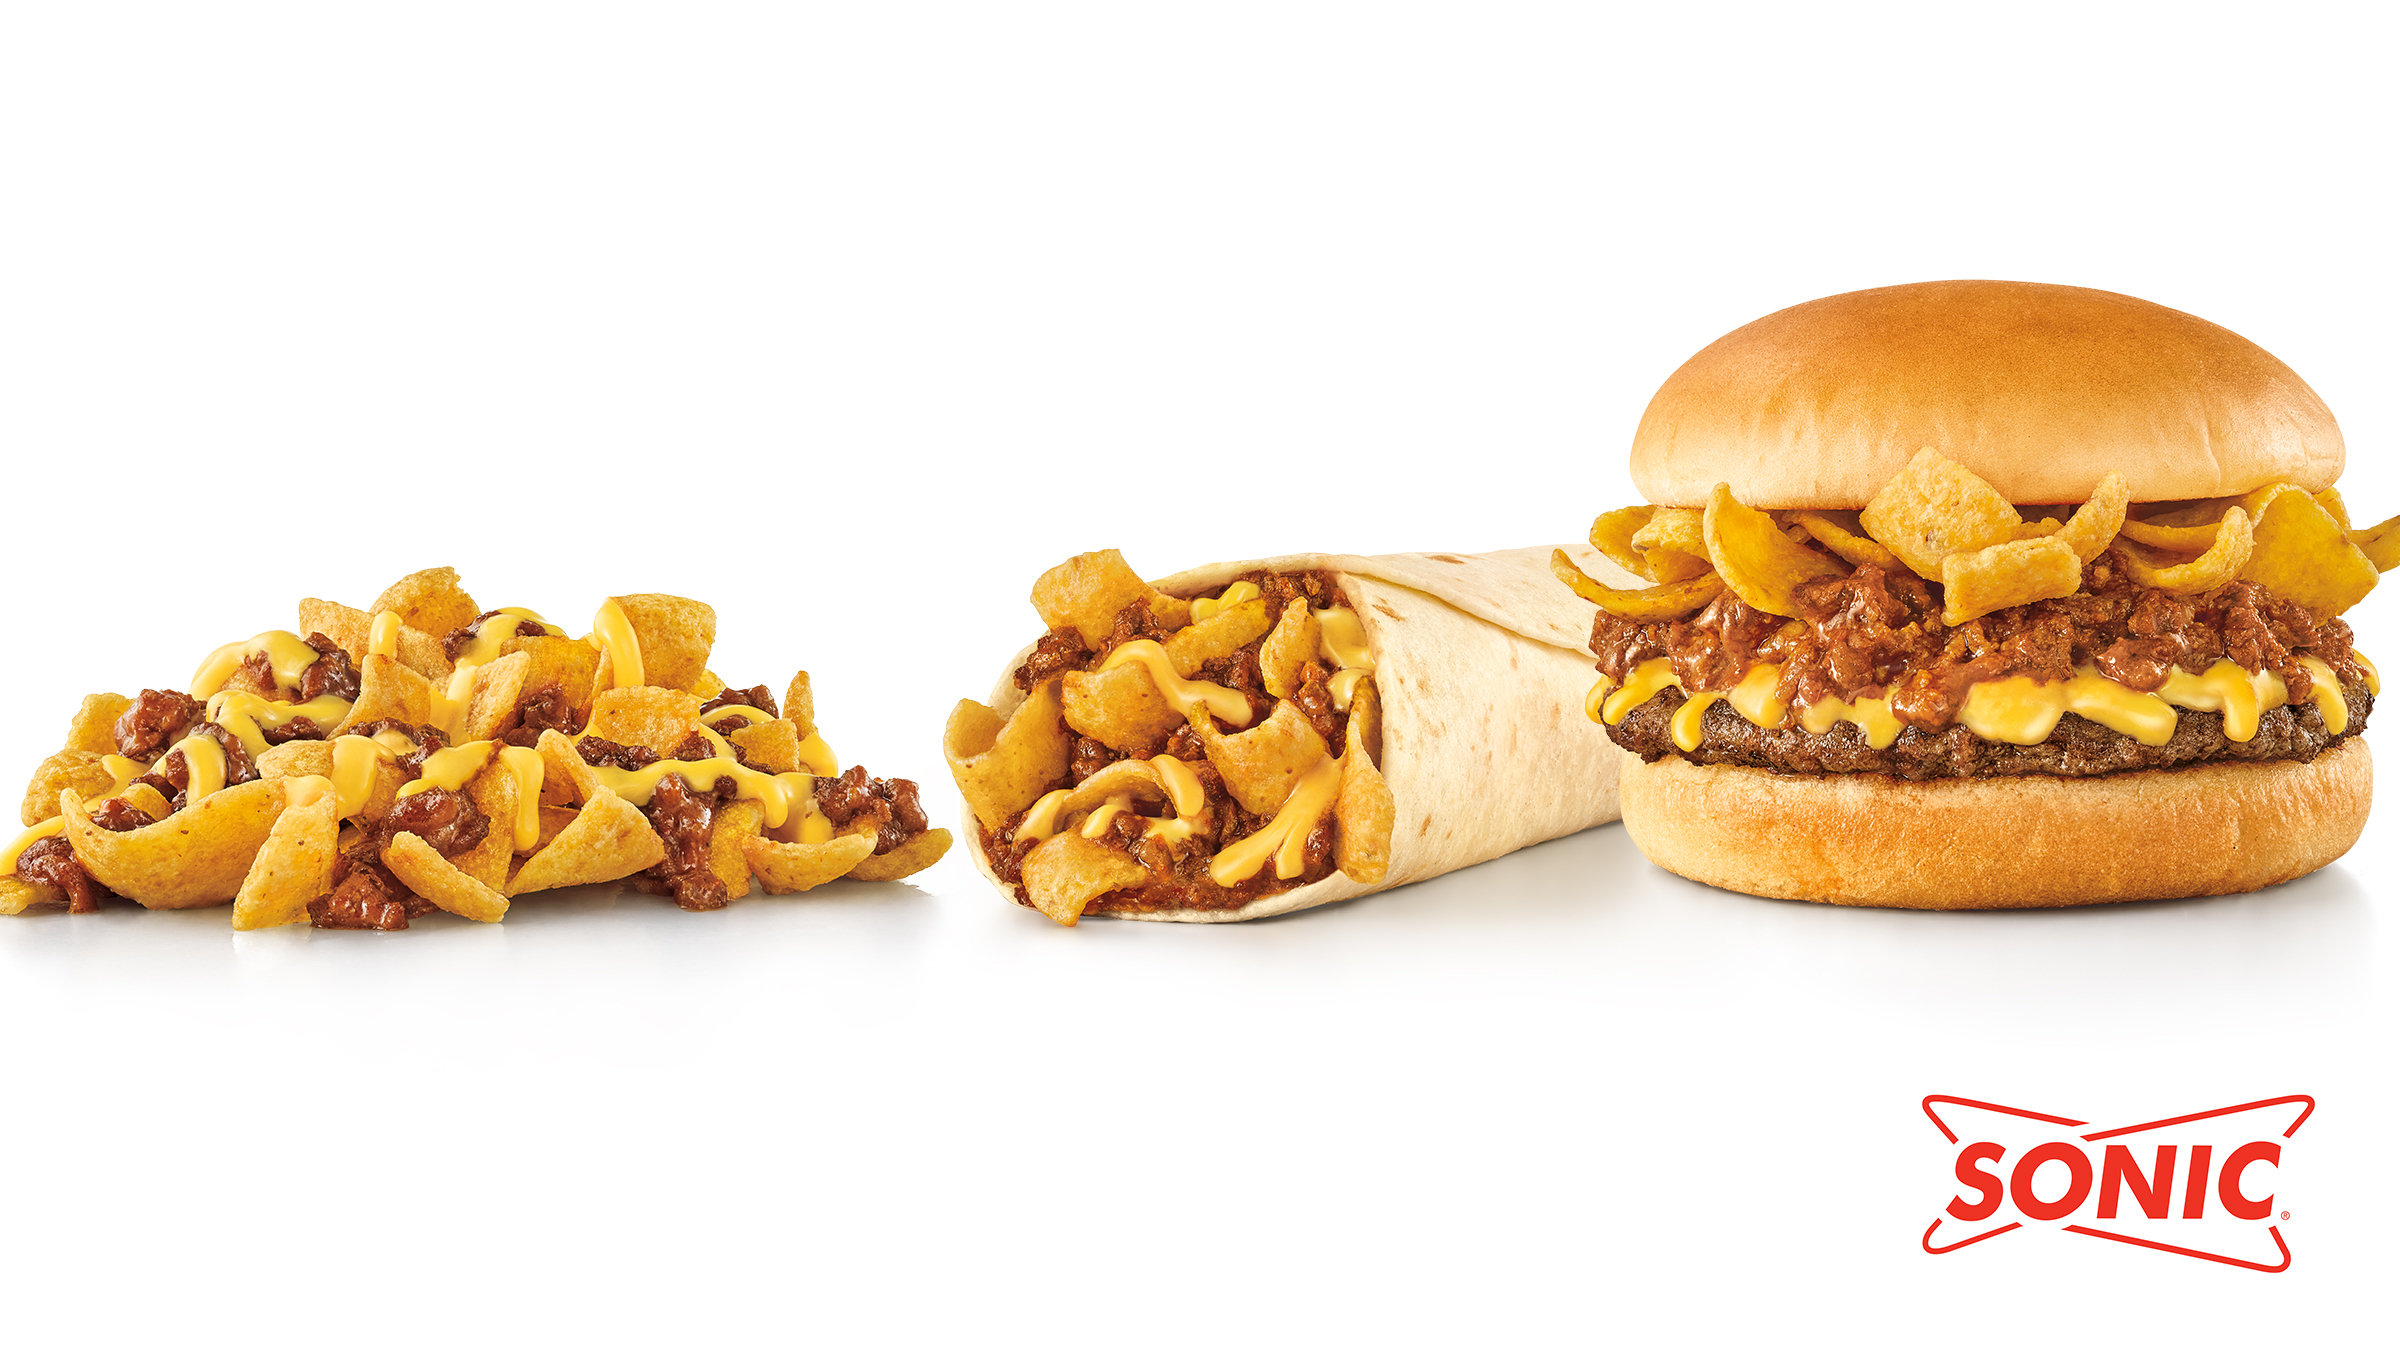 SONIC Brings Extra Crunch and Flavor to DriveIns with New FRITOS Chili